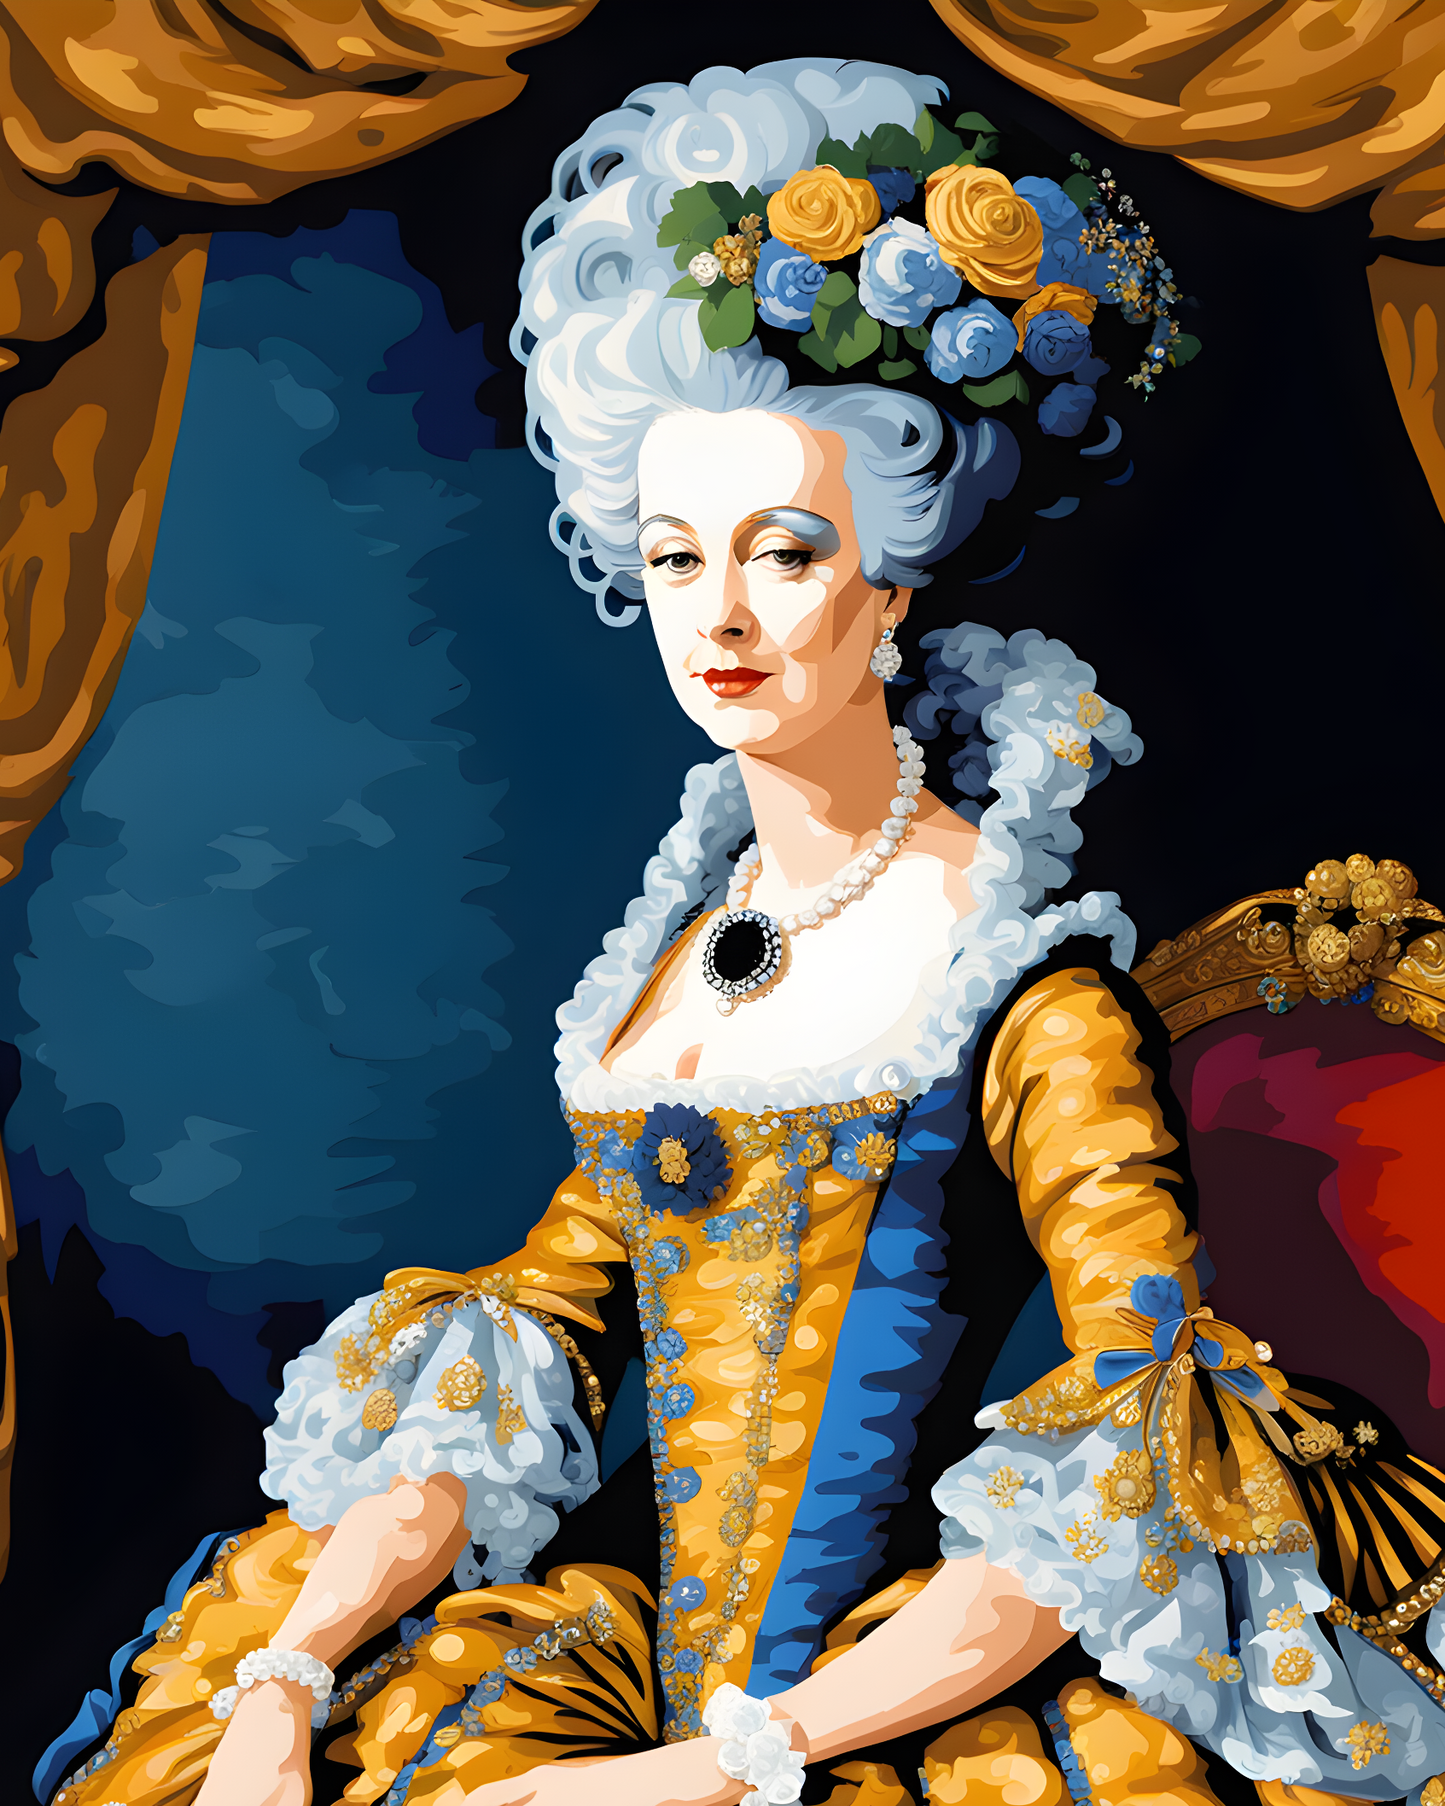 Royal Portrait PD (23) - Marie Antoinette, Queen of France - Paint-By-Number Kit